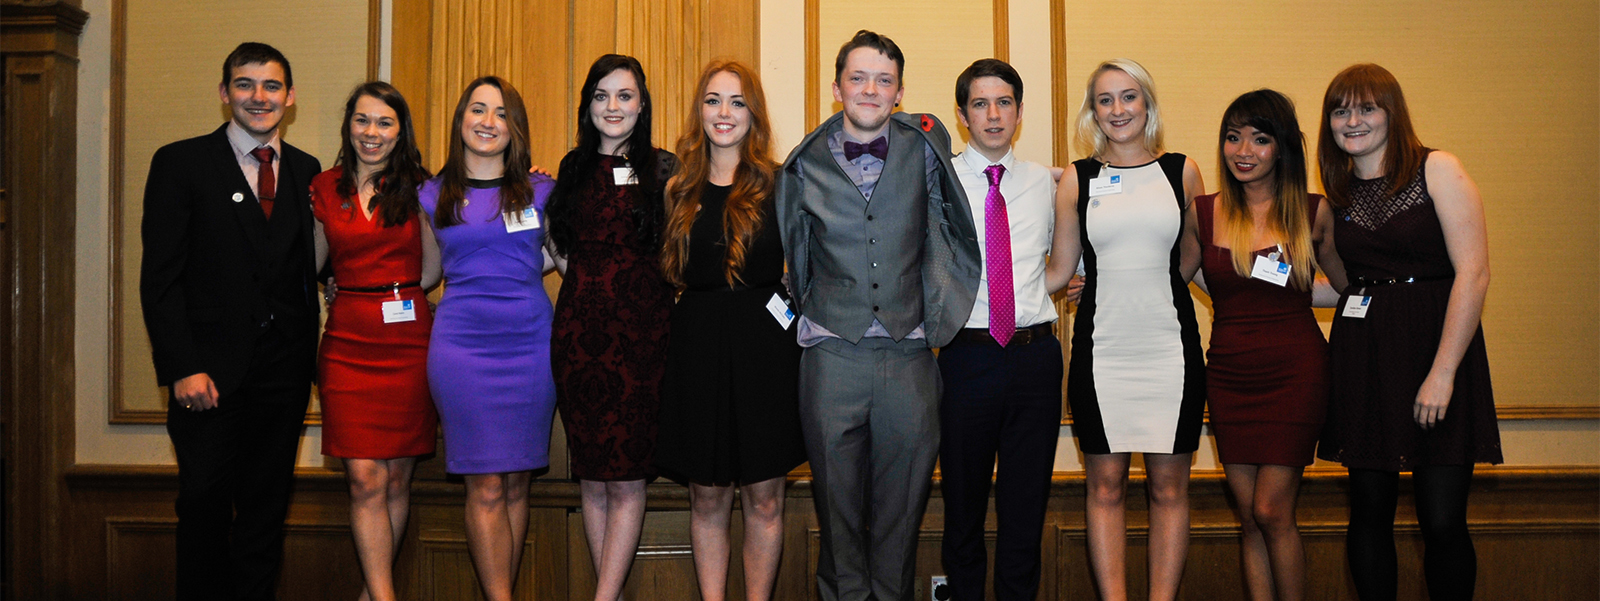 Students at Engineering Gala dinner